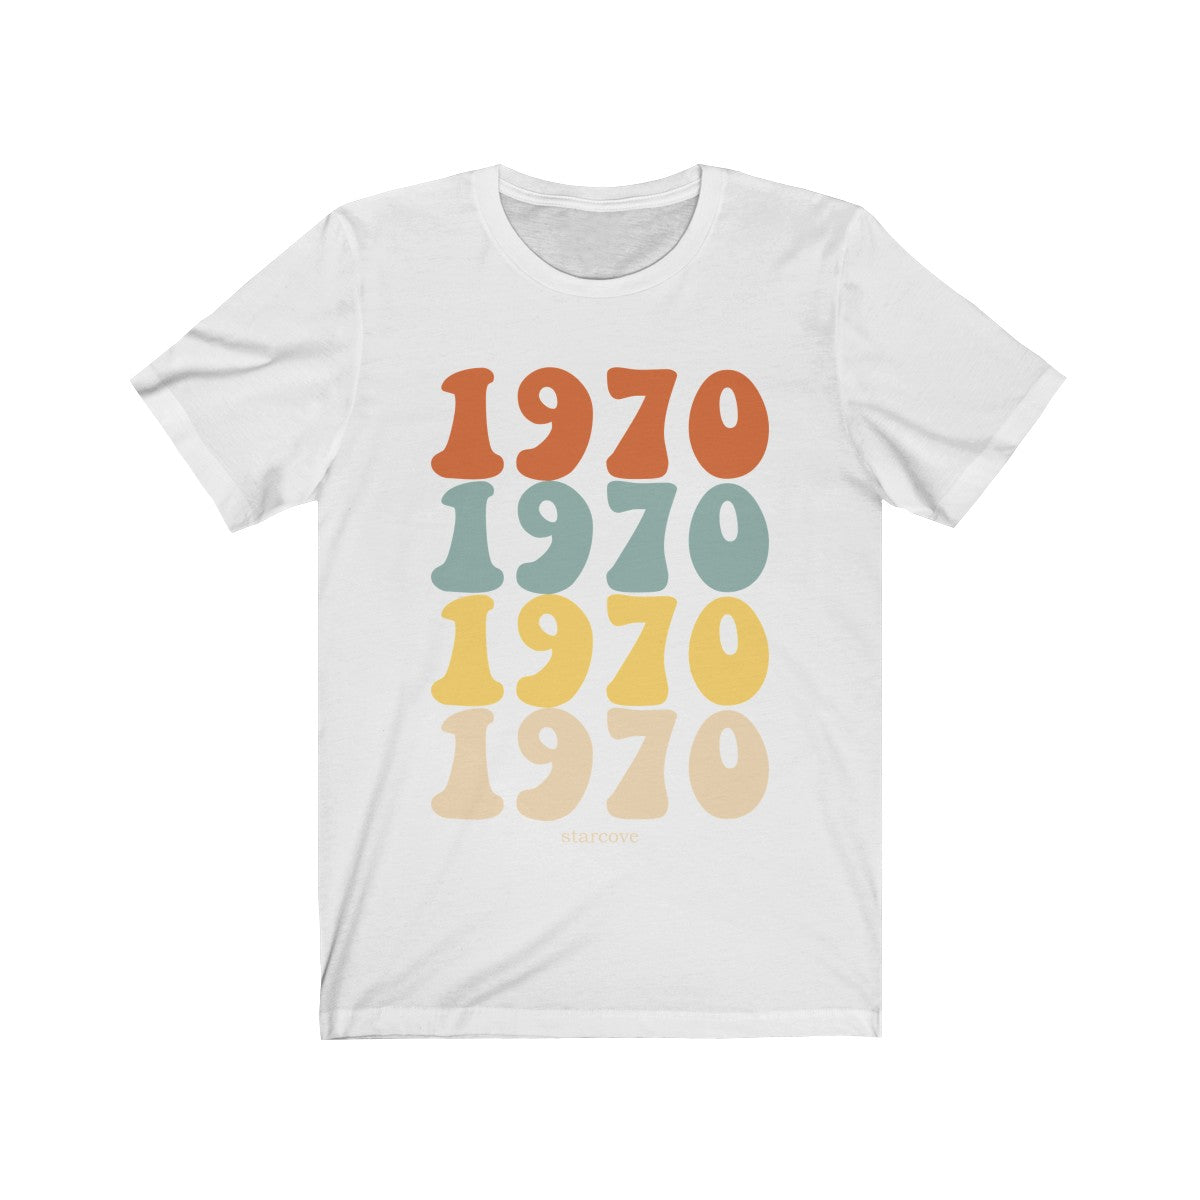 1970 shirt, 51st Birthday Party Turning 51 Years, 70s Retro Vintage Gift Idea Women Men, Born Made in 1970 Funny TShirt Starcove Fashion